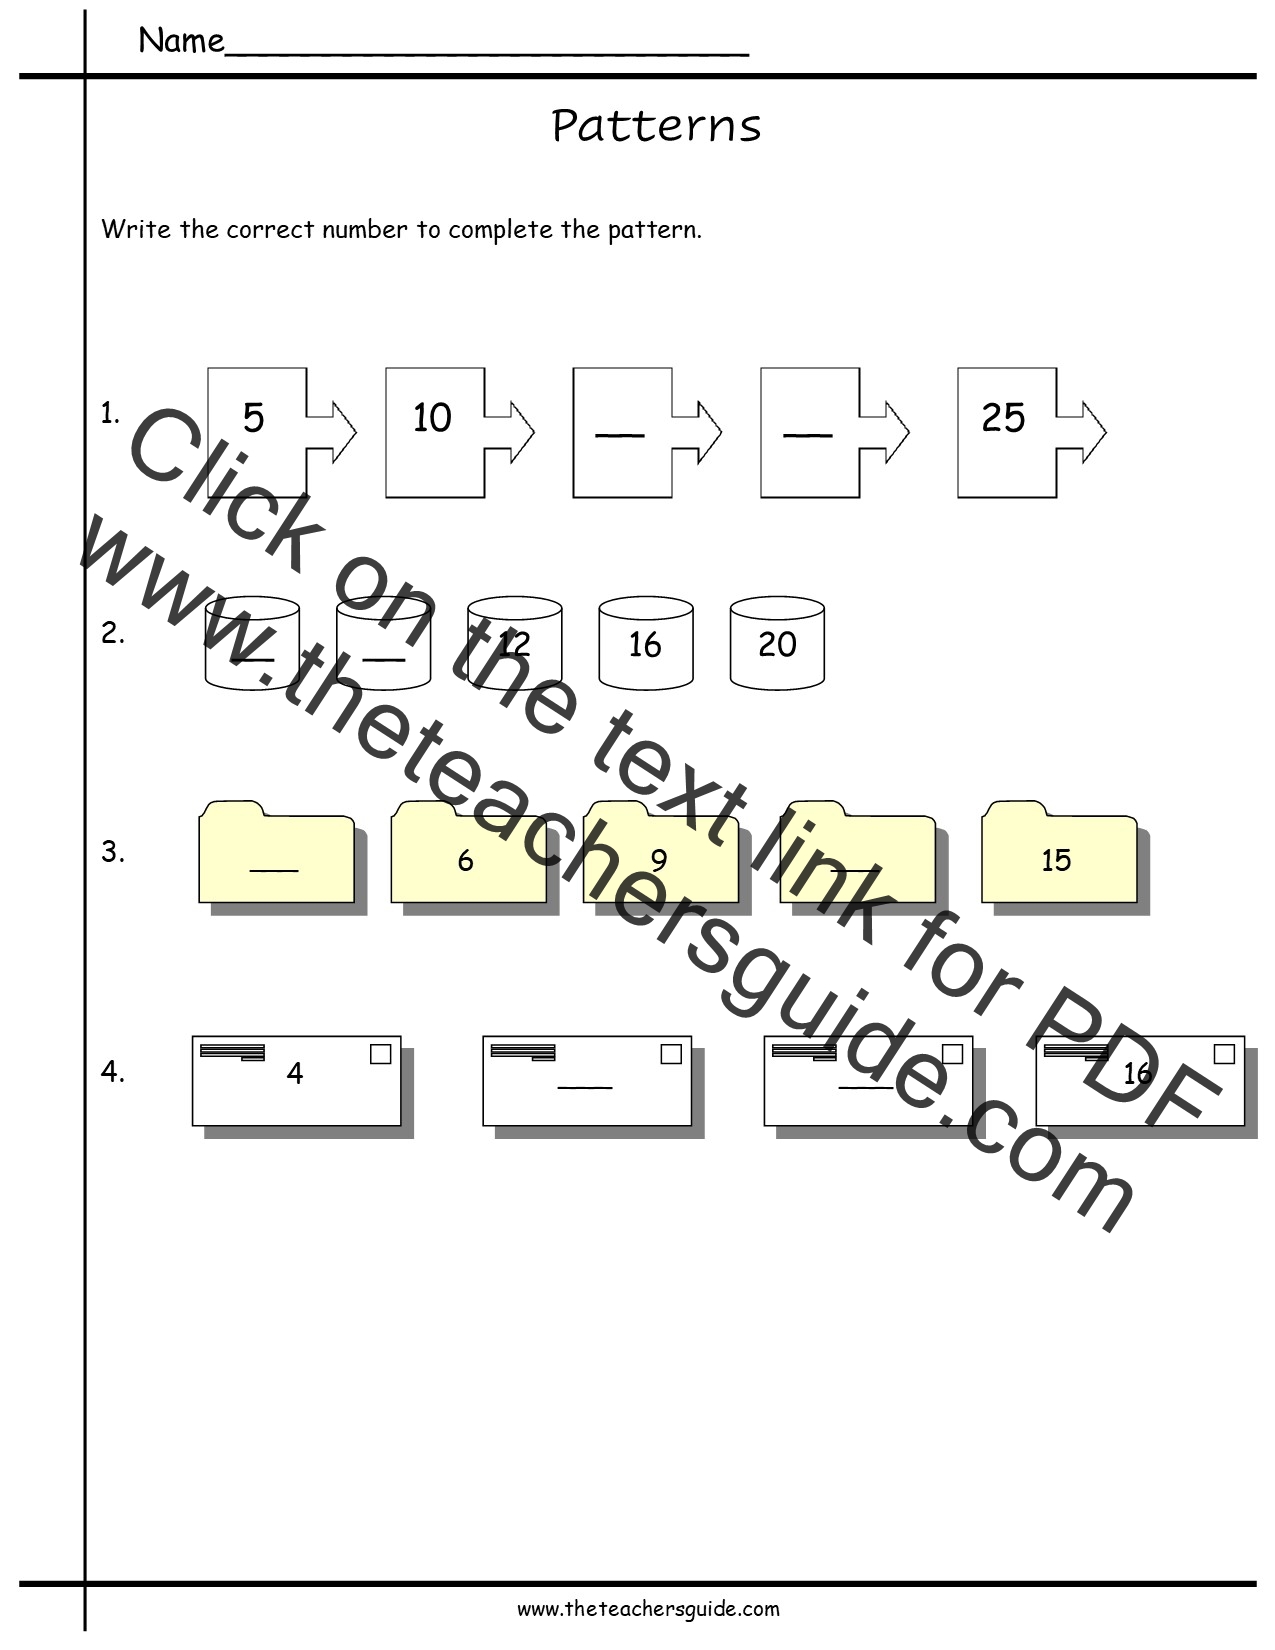 free-math-printouts-from-the-teacher-s-guide